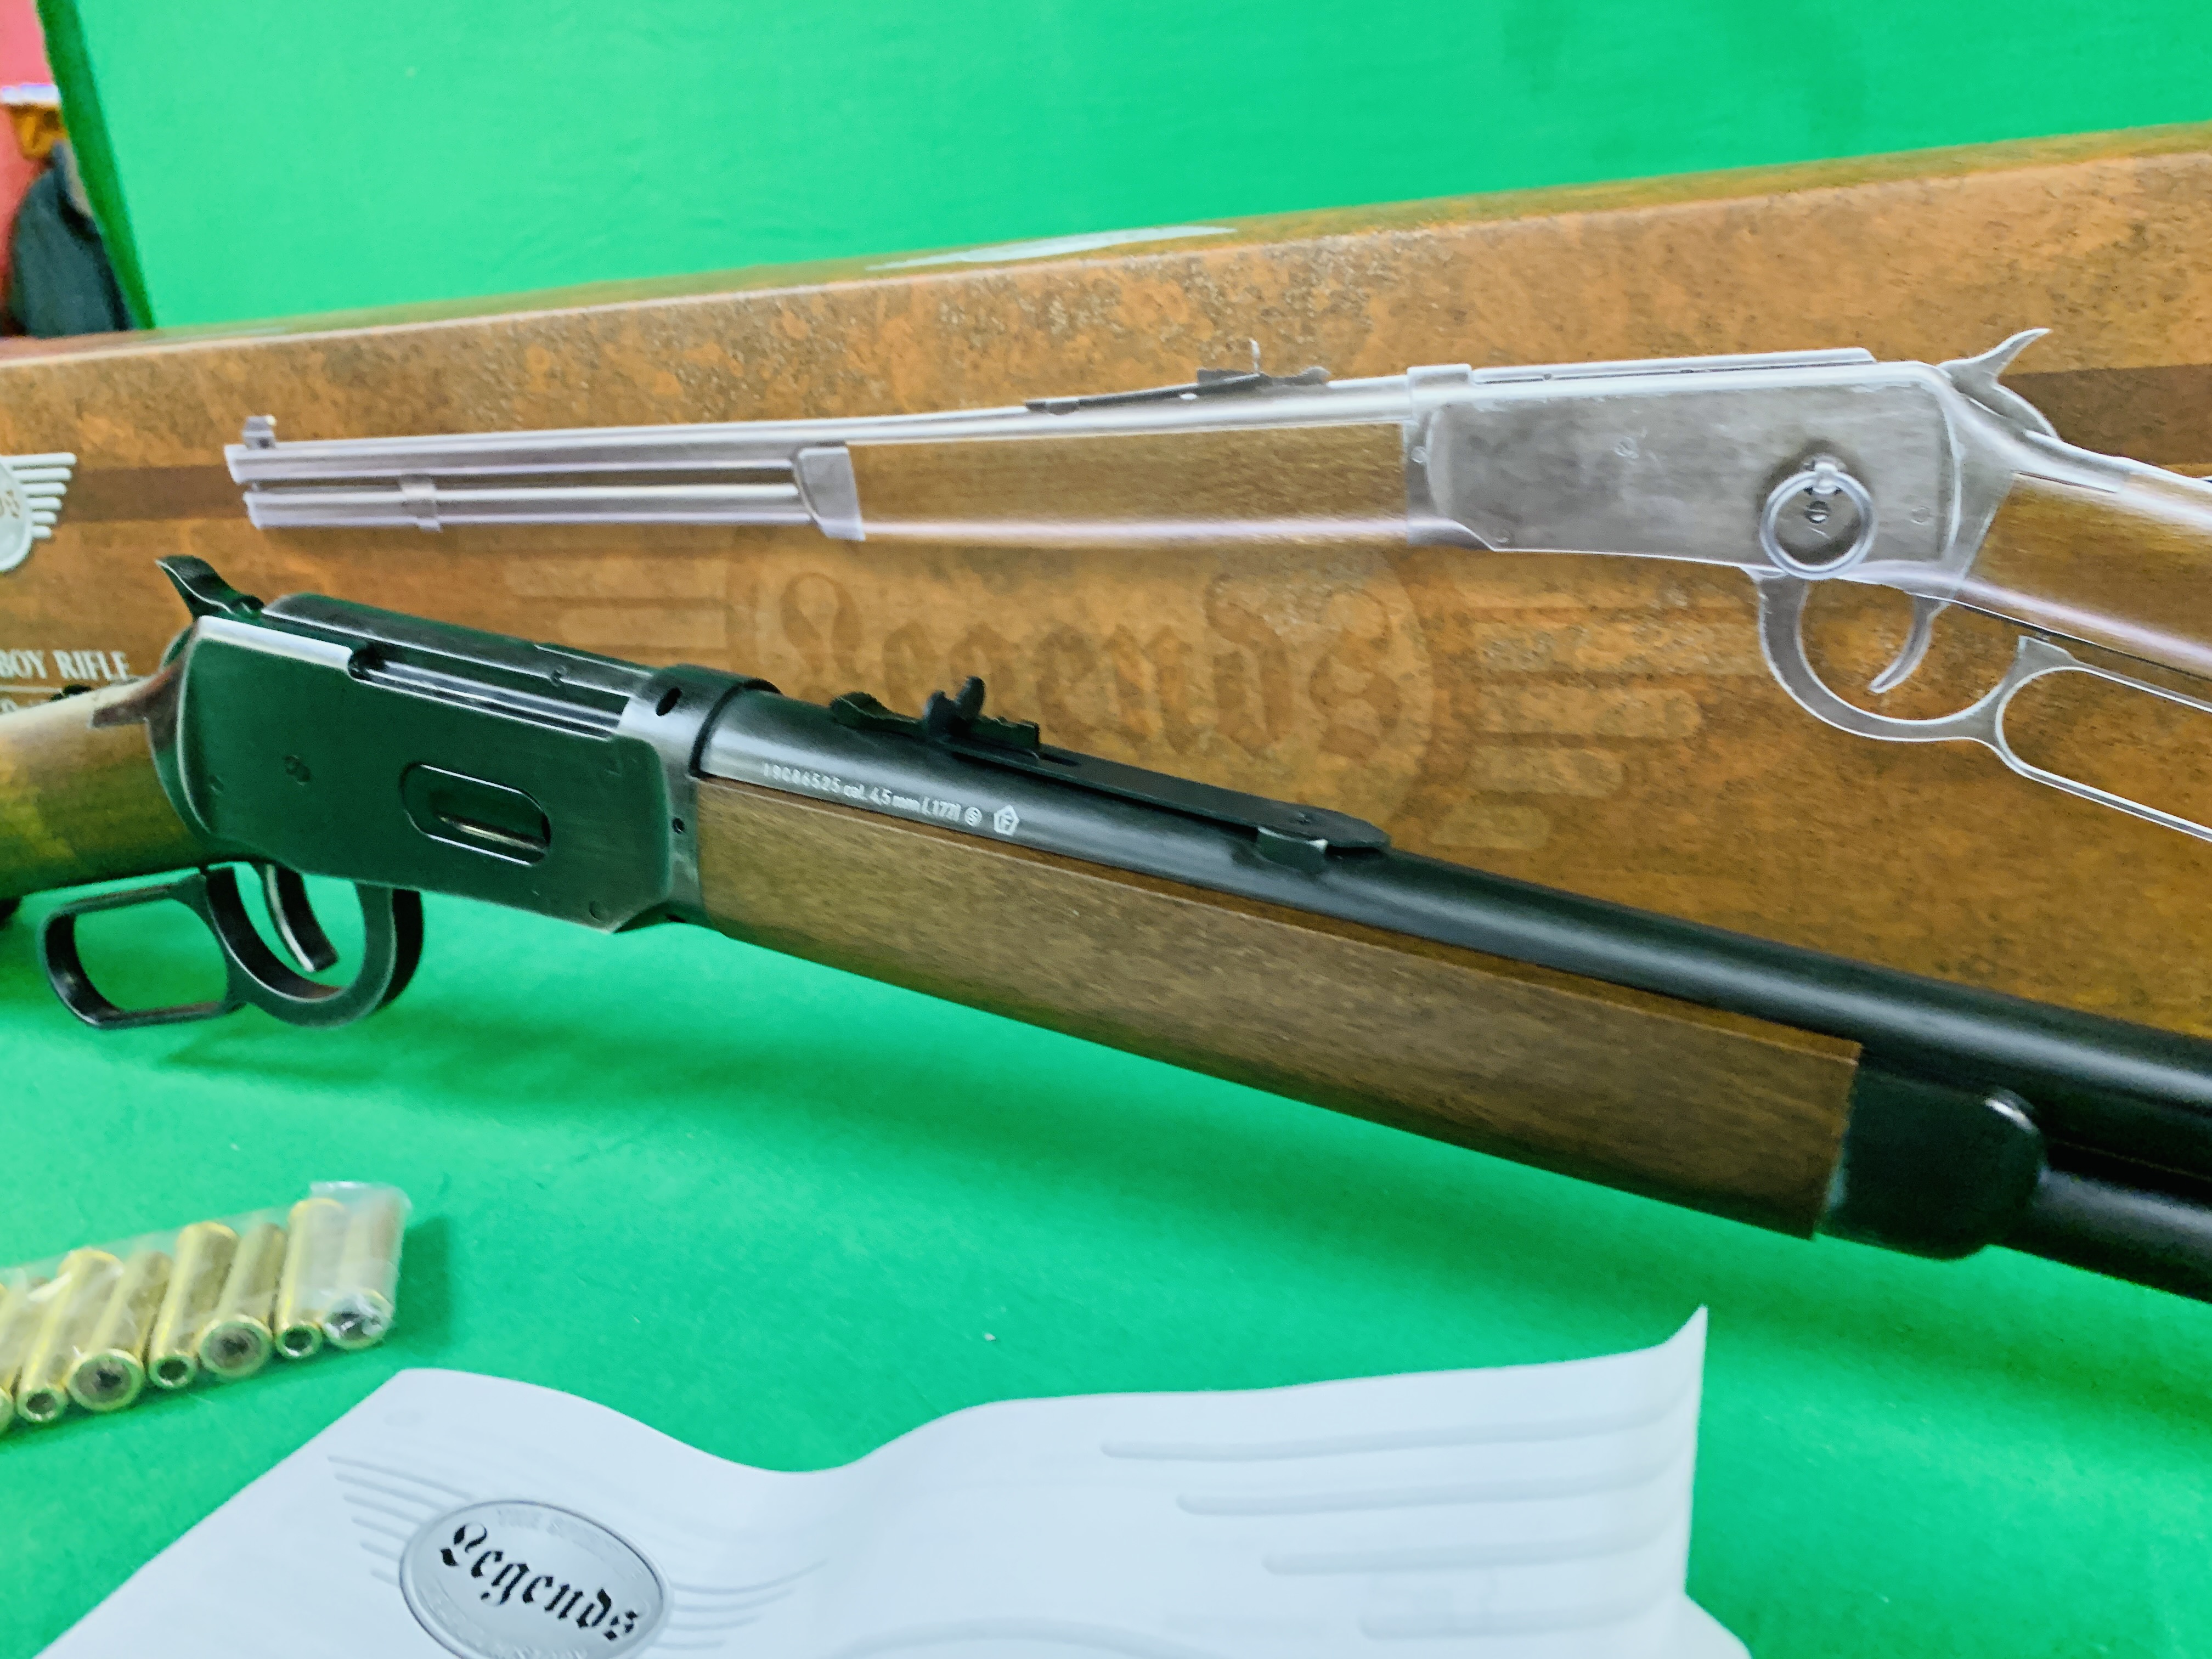 A UMAREX LEGENDS COWBOY RIFLE CO² AIR GUN 10 ROUND CAPACITY LEVER ACTION BOXED AS NEW - (ALL GUNS - Image 5 of 9